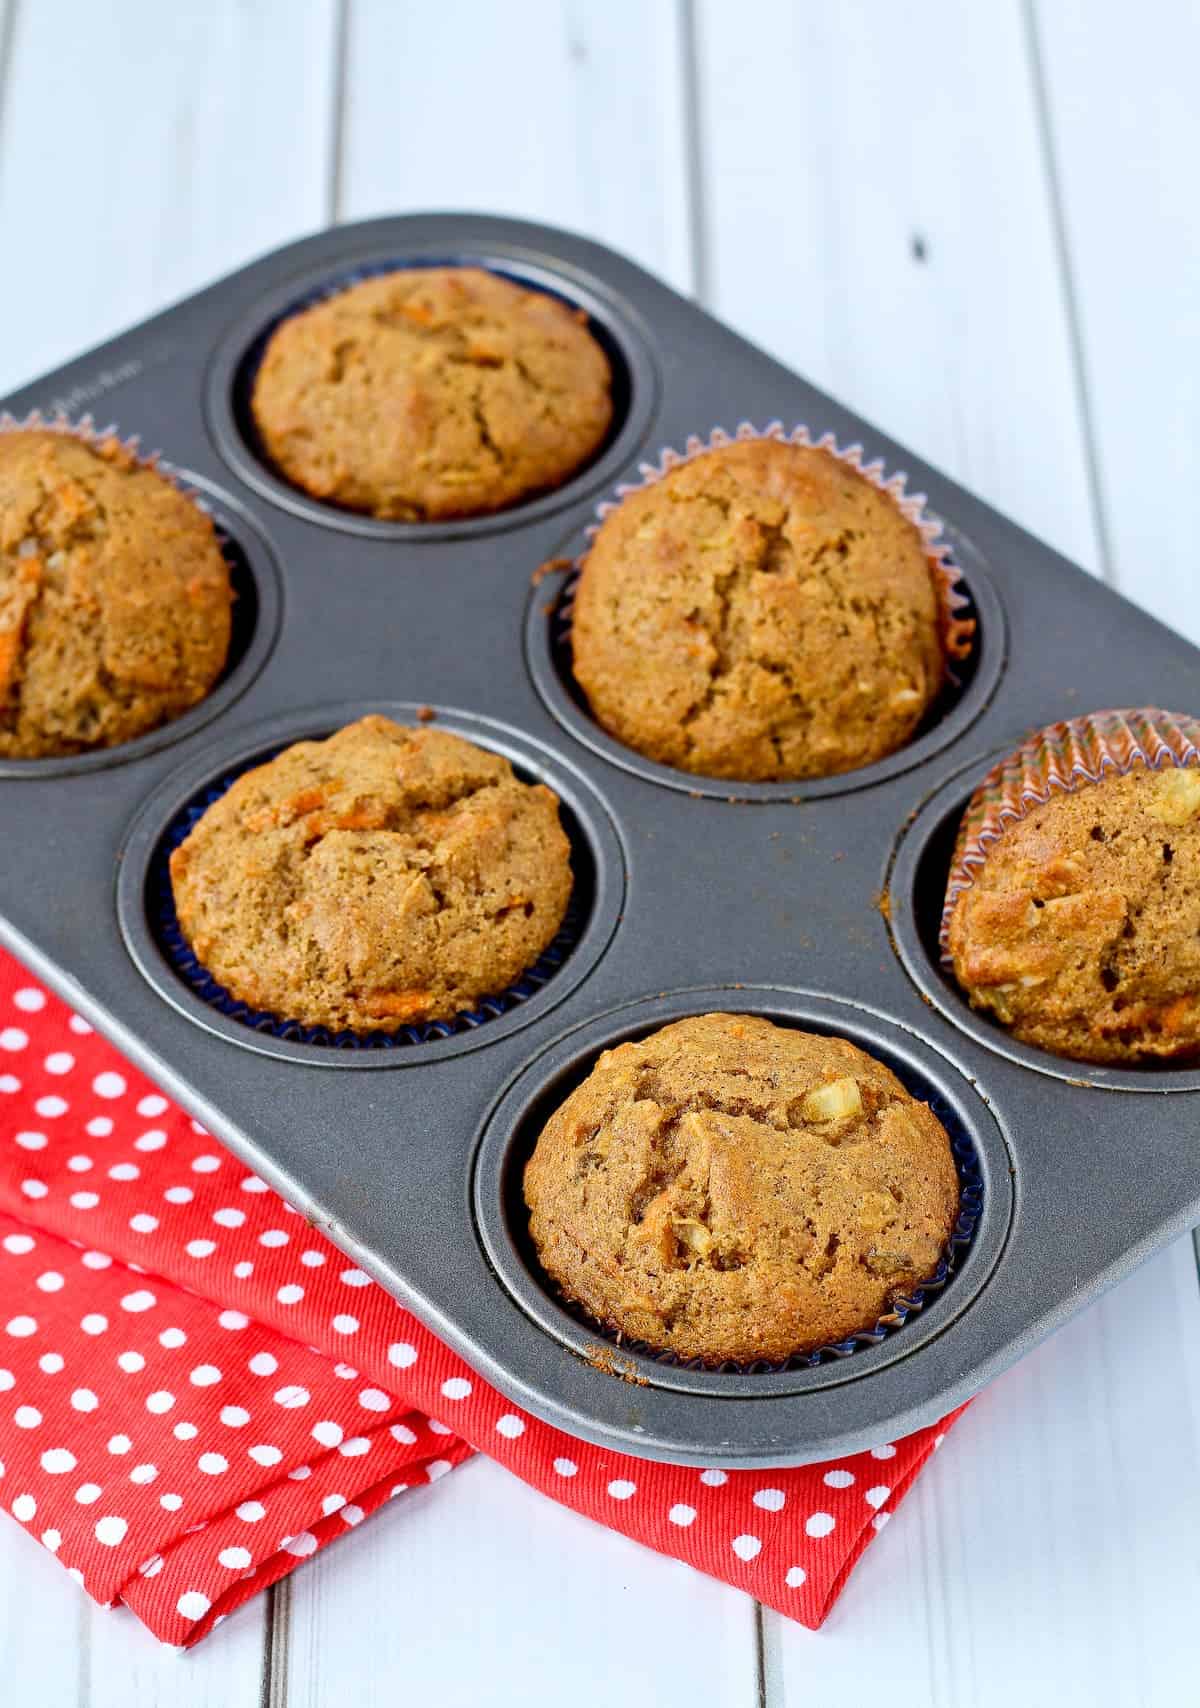 Morning glory muffins in a muffin tin.